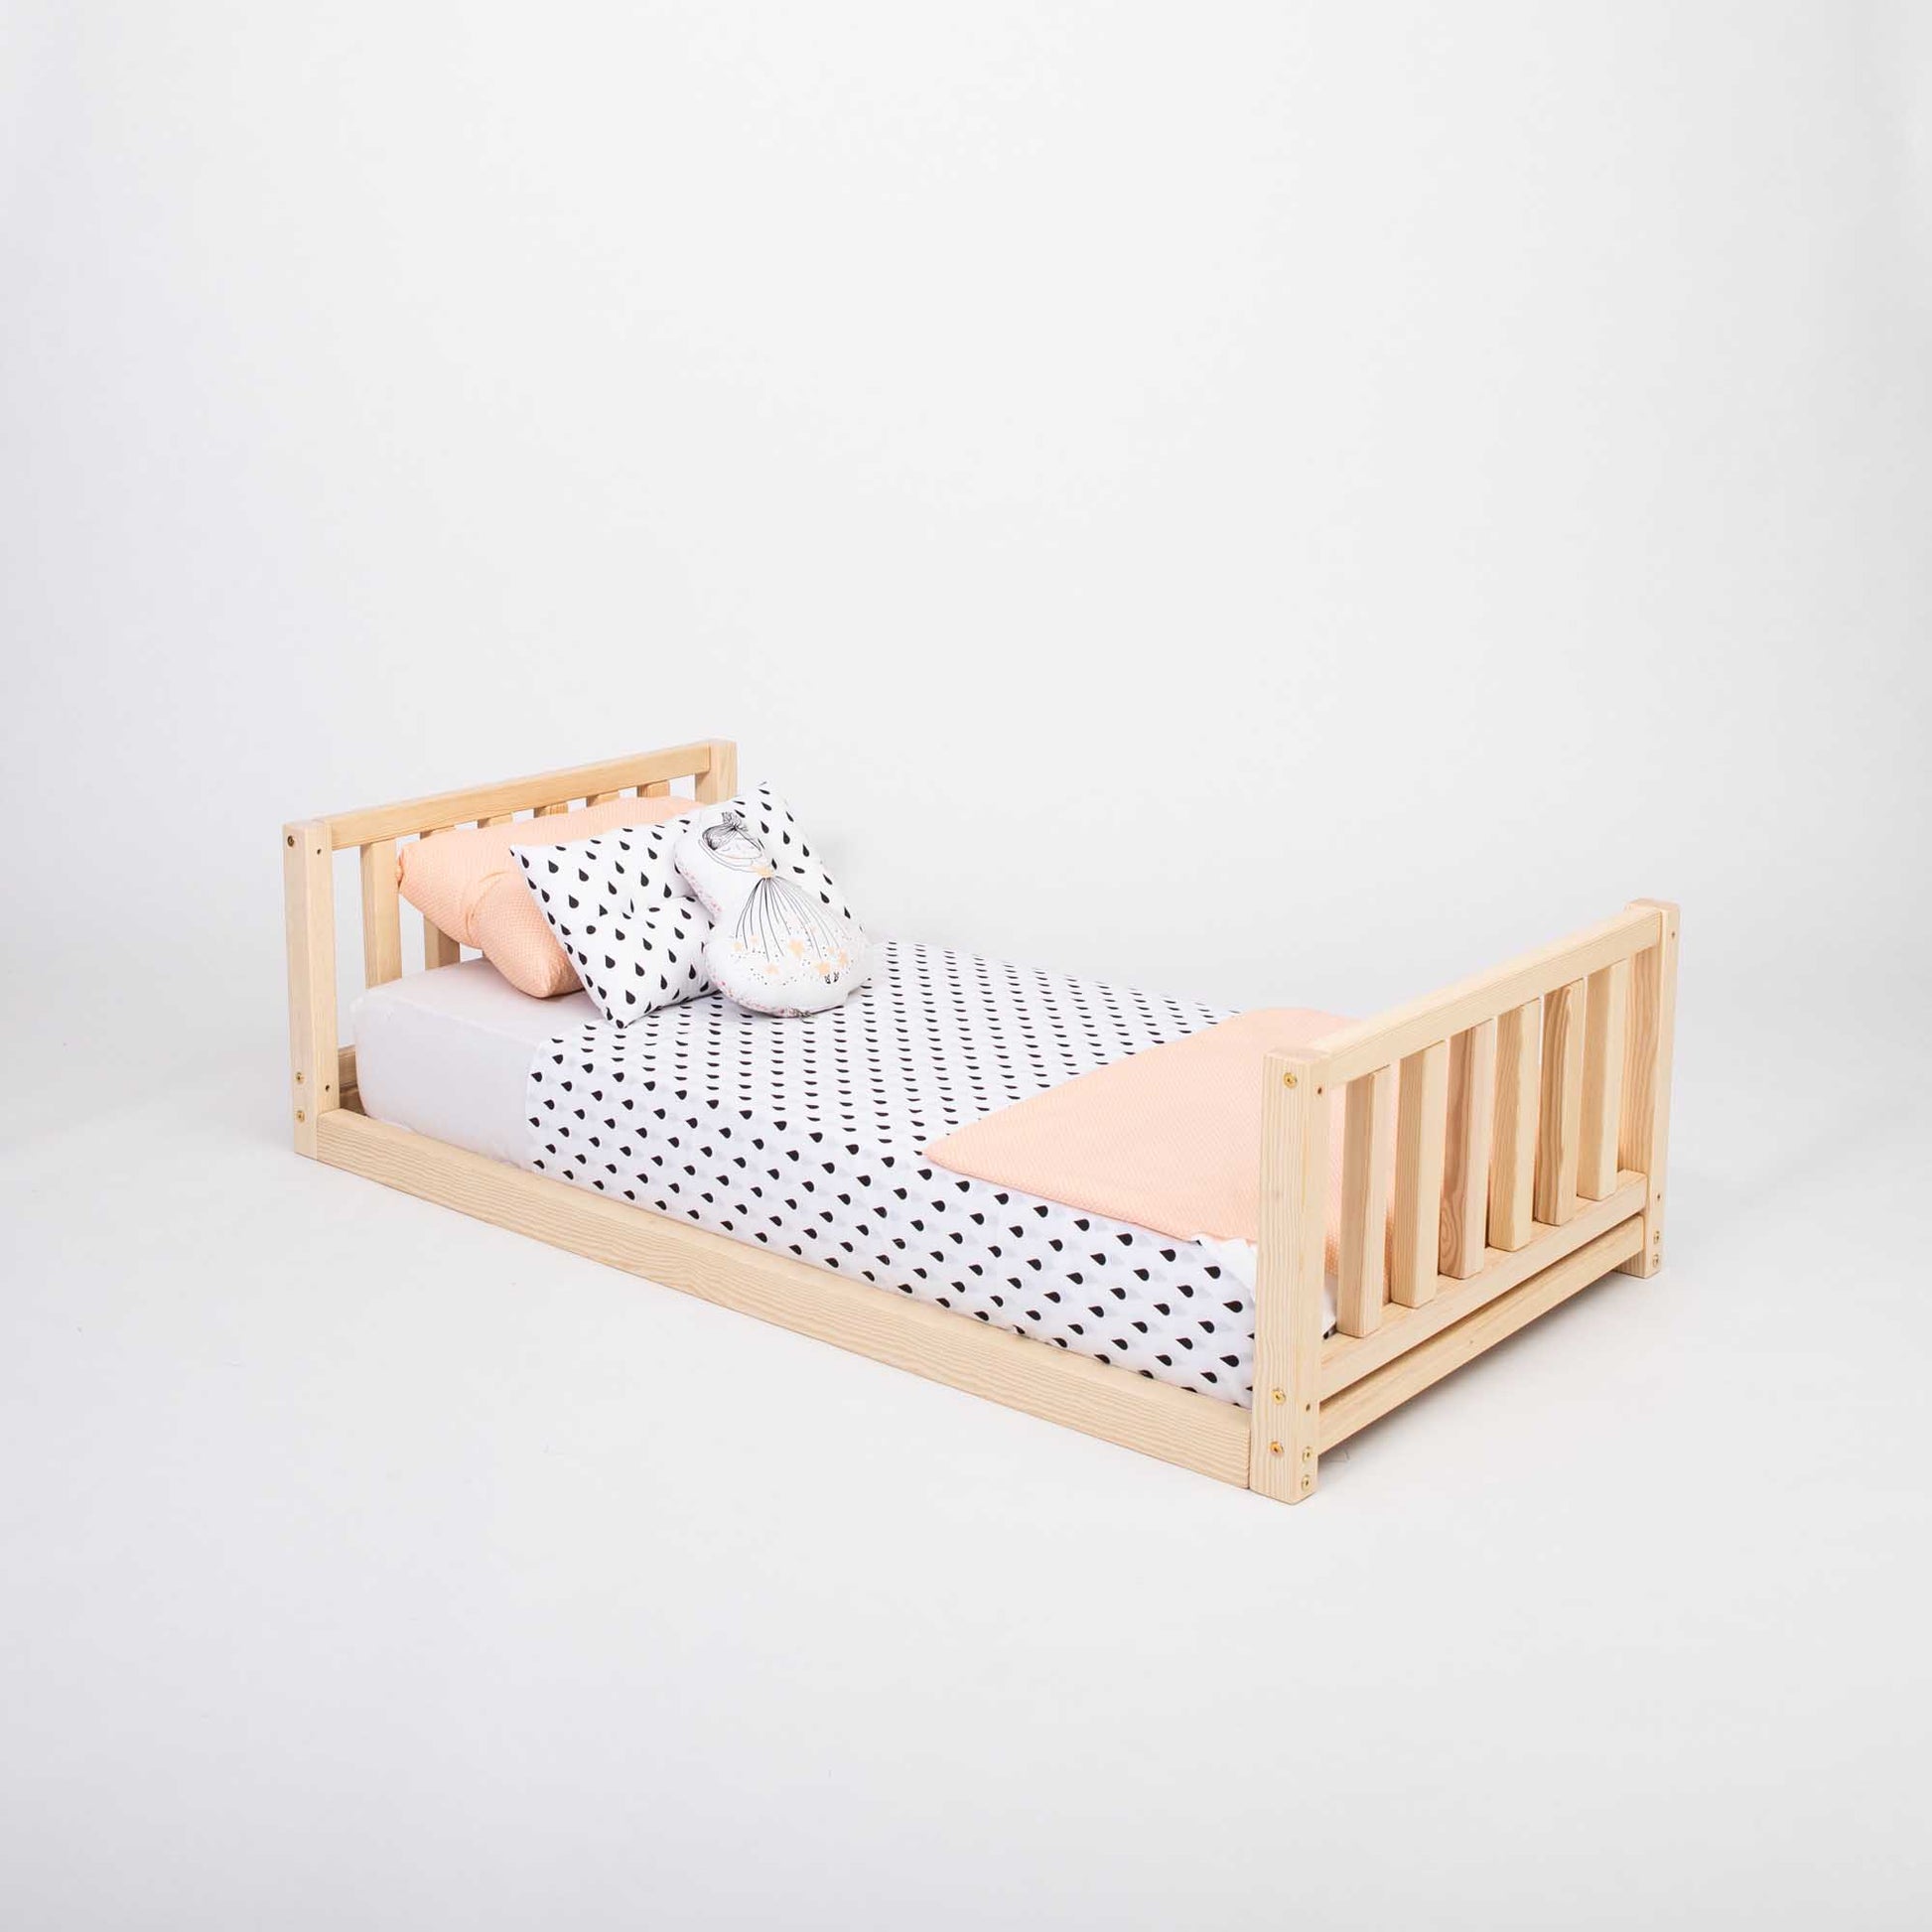 A Sweet Home From Wood kids' bed with a headboard and footboard and polka dot bedding.